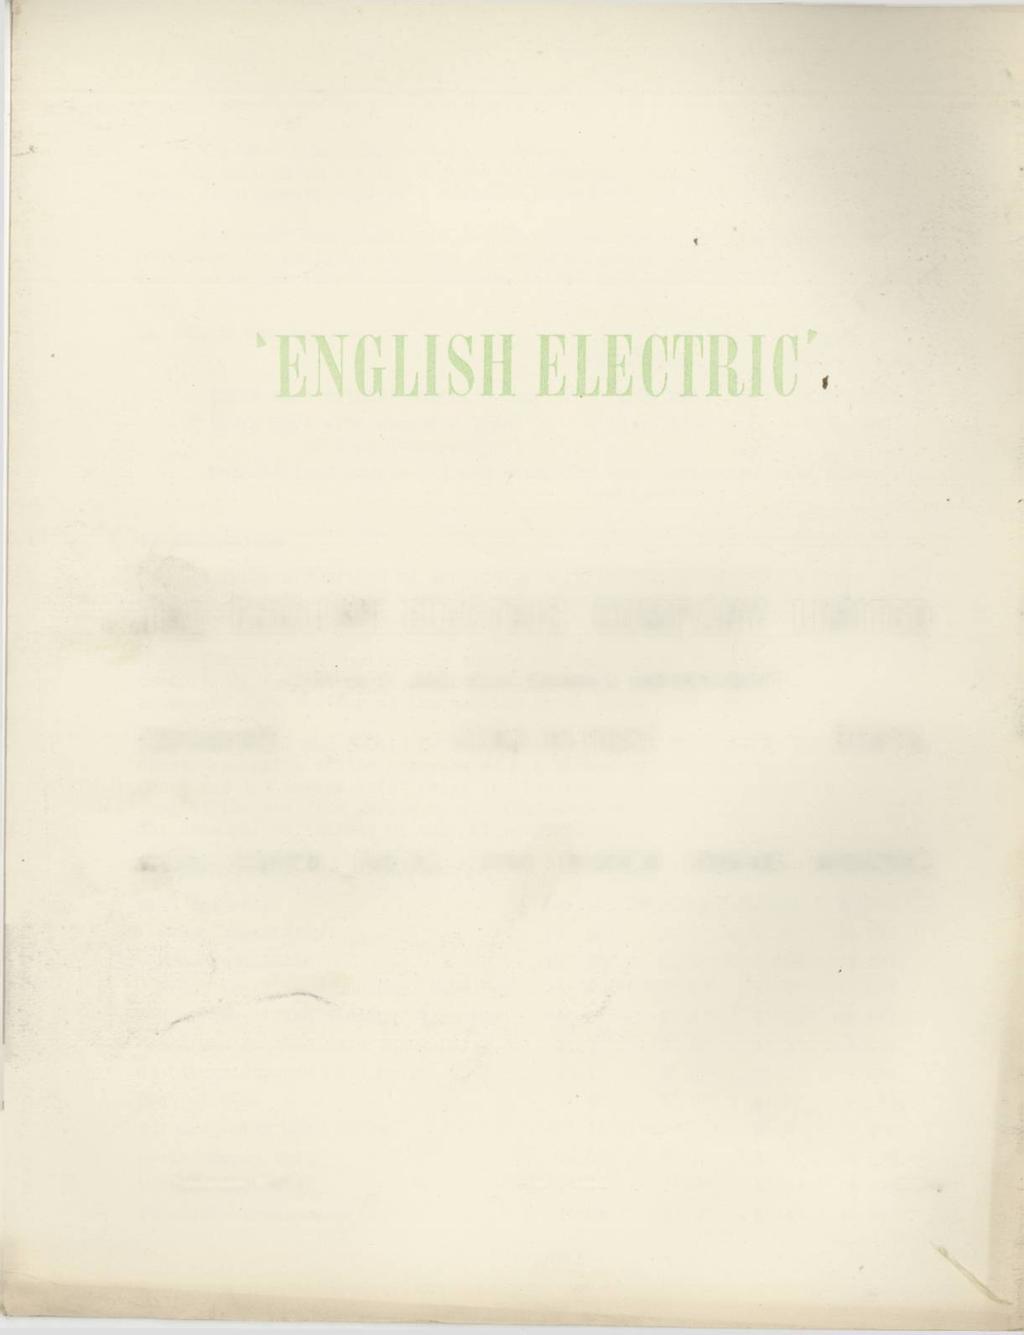 THE ENGLISH ELECTRIC COMPANY LIMITED CONTROL AND